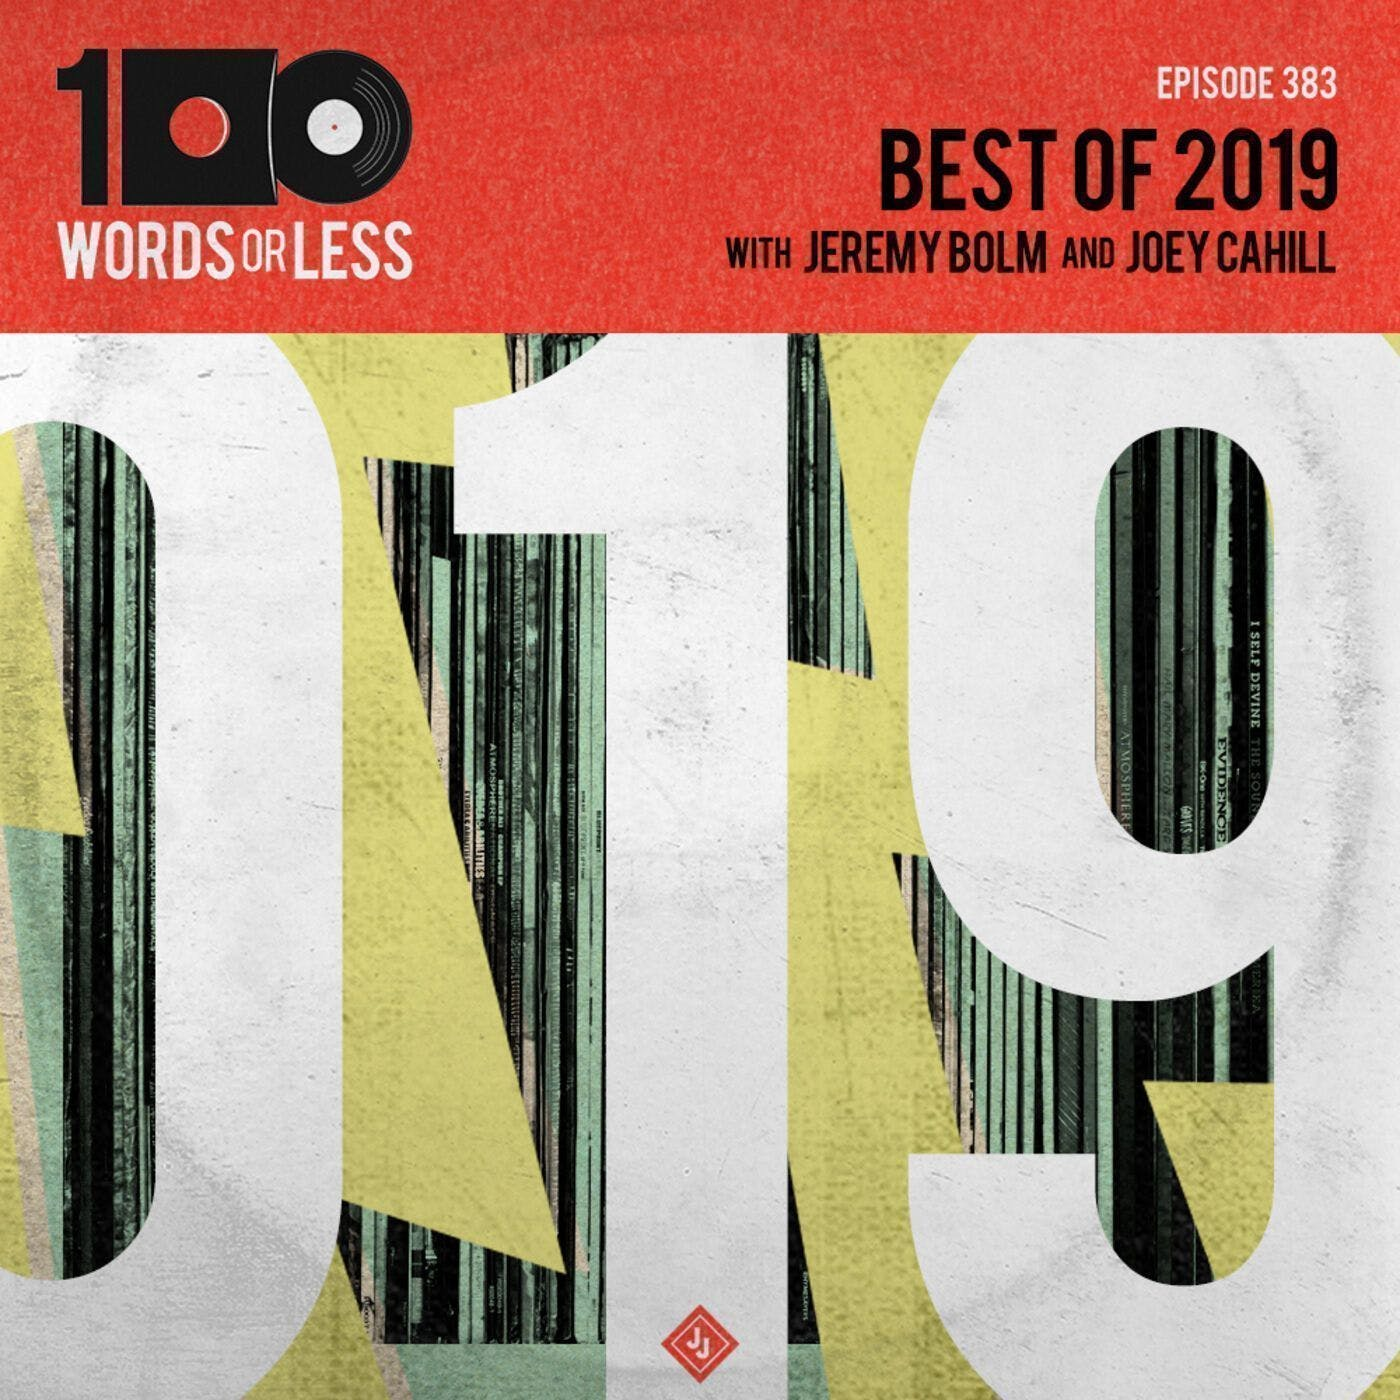 Best of 2019 w/ Jeremy Bolm (Touche Amore) and Joey Cahill (6131 Records)